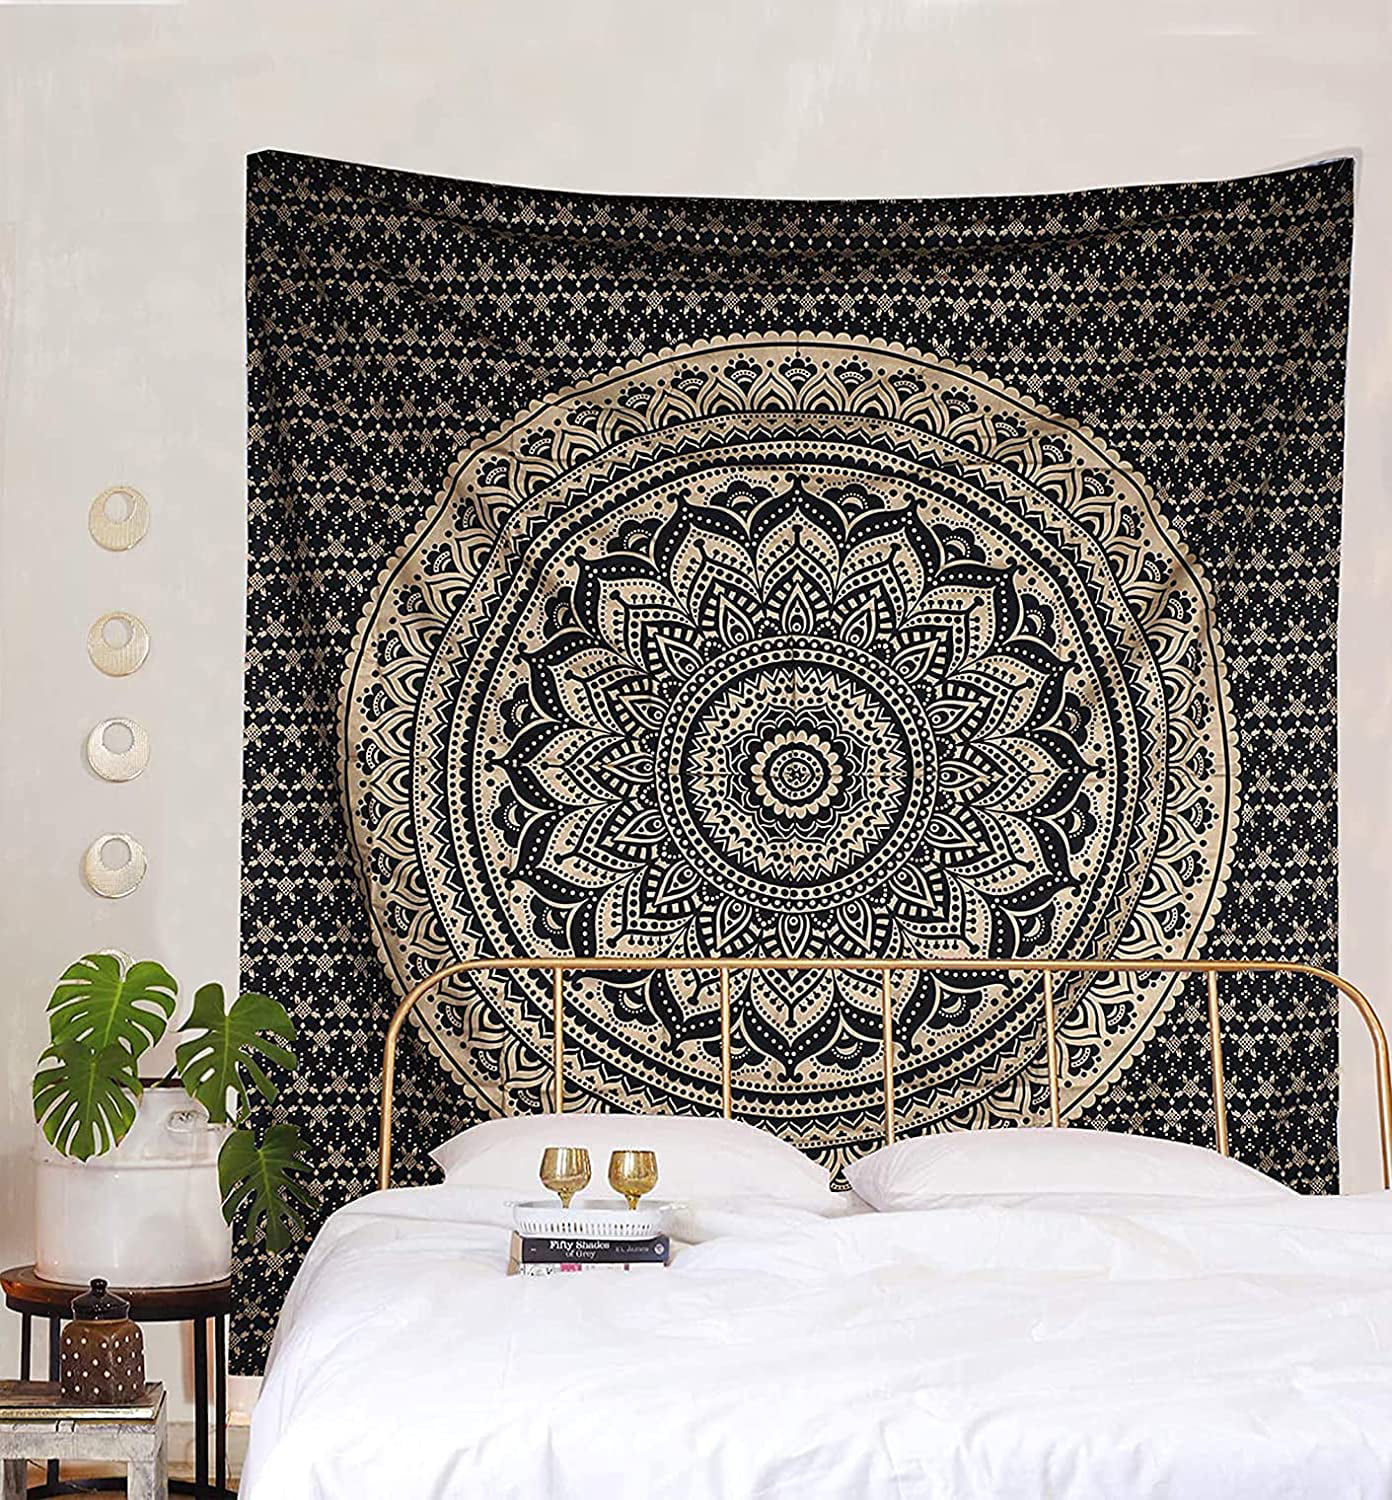 Tapestry White Gold Ombre Mandala Bohemian Home Decor Bedspread Wall Hanging Art 